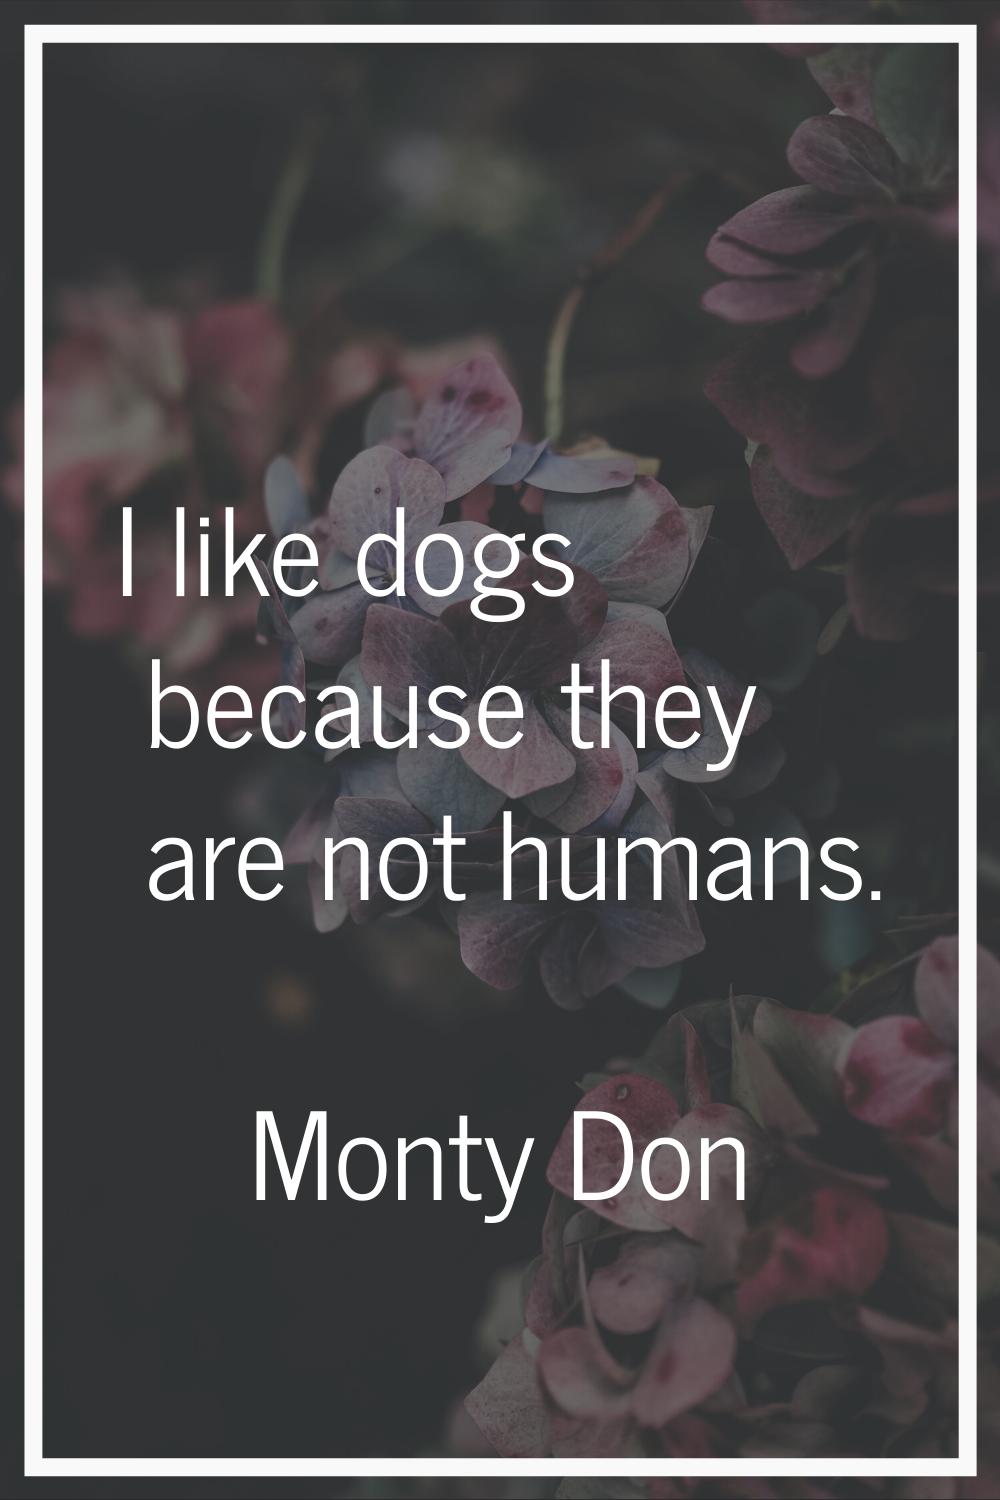 I like dogs because they are not humans.